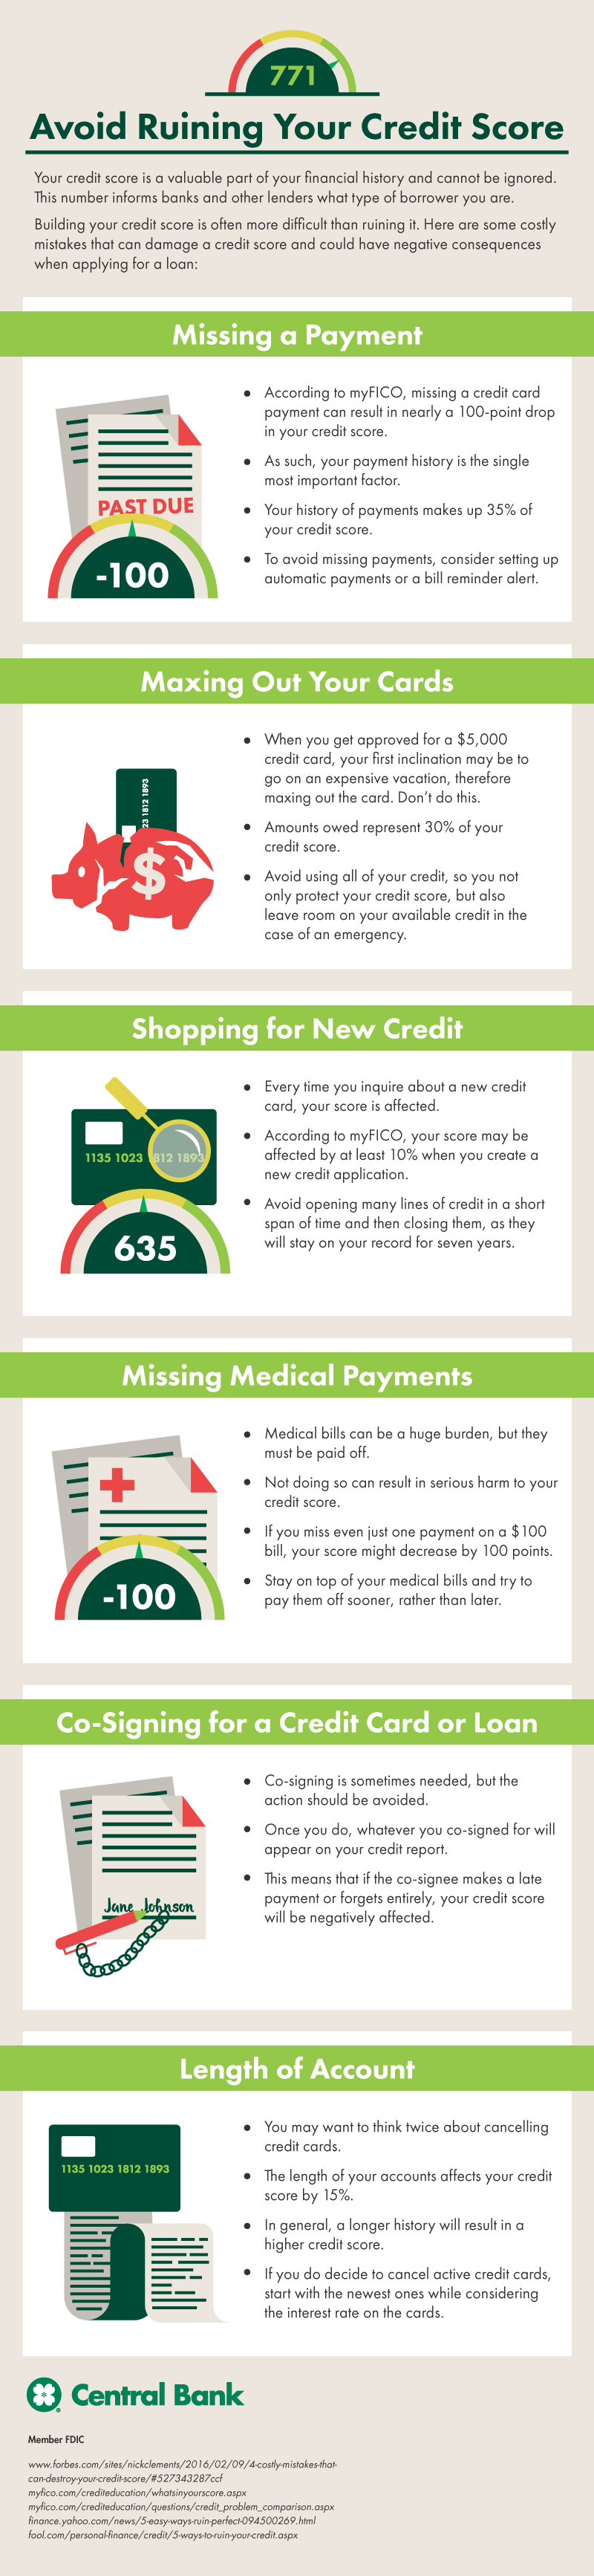 An infographic with 6 tips to avoid ruining your credit score